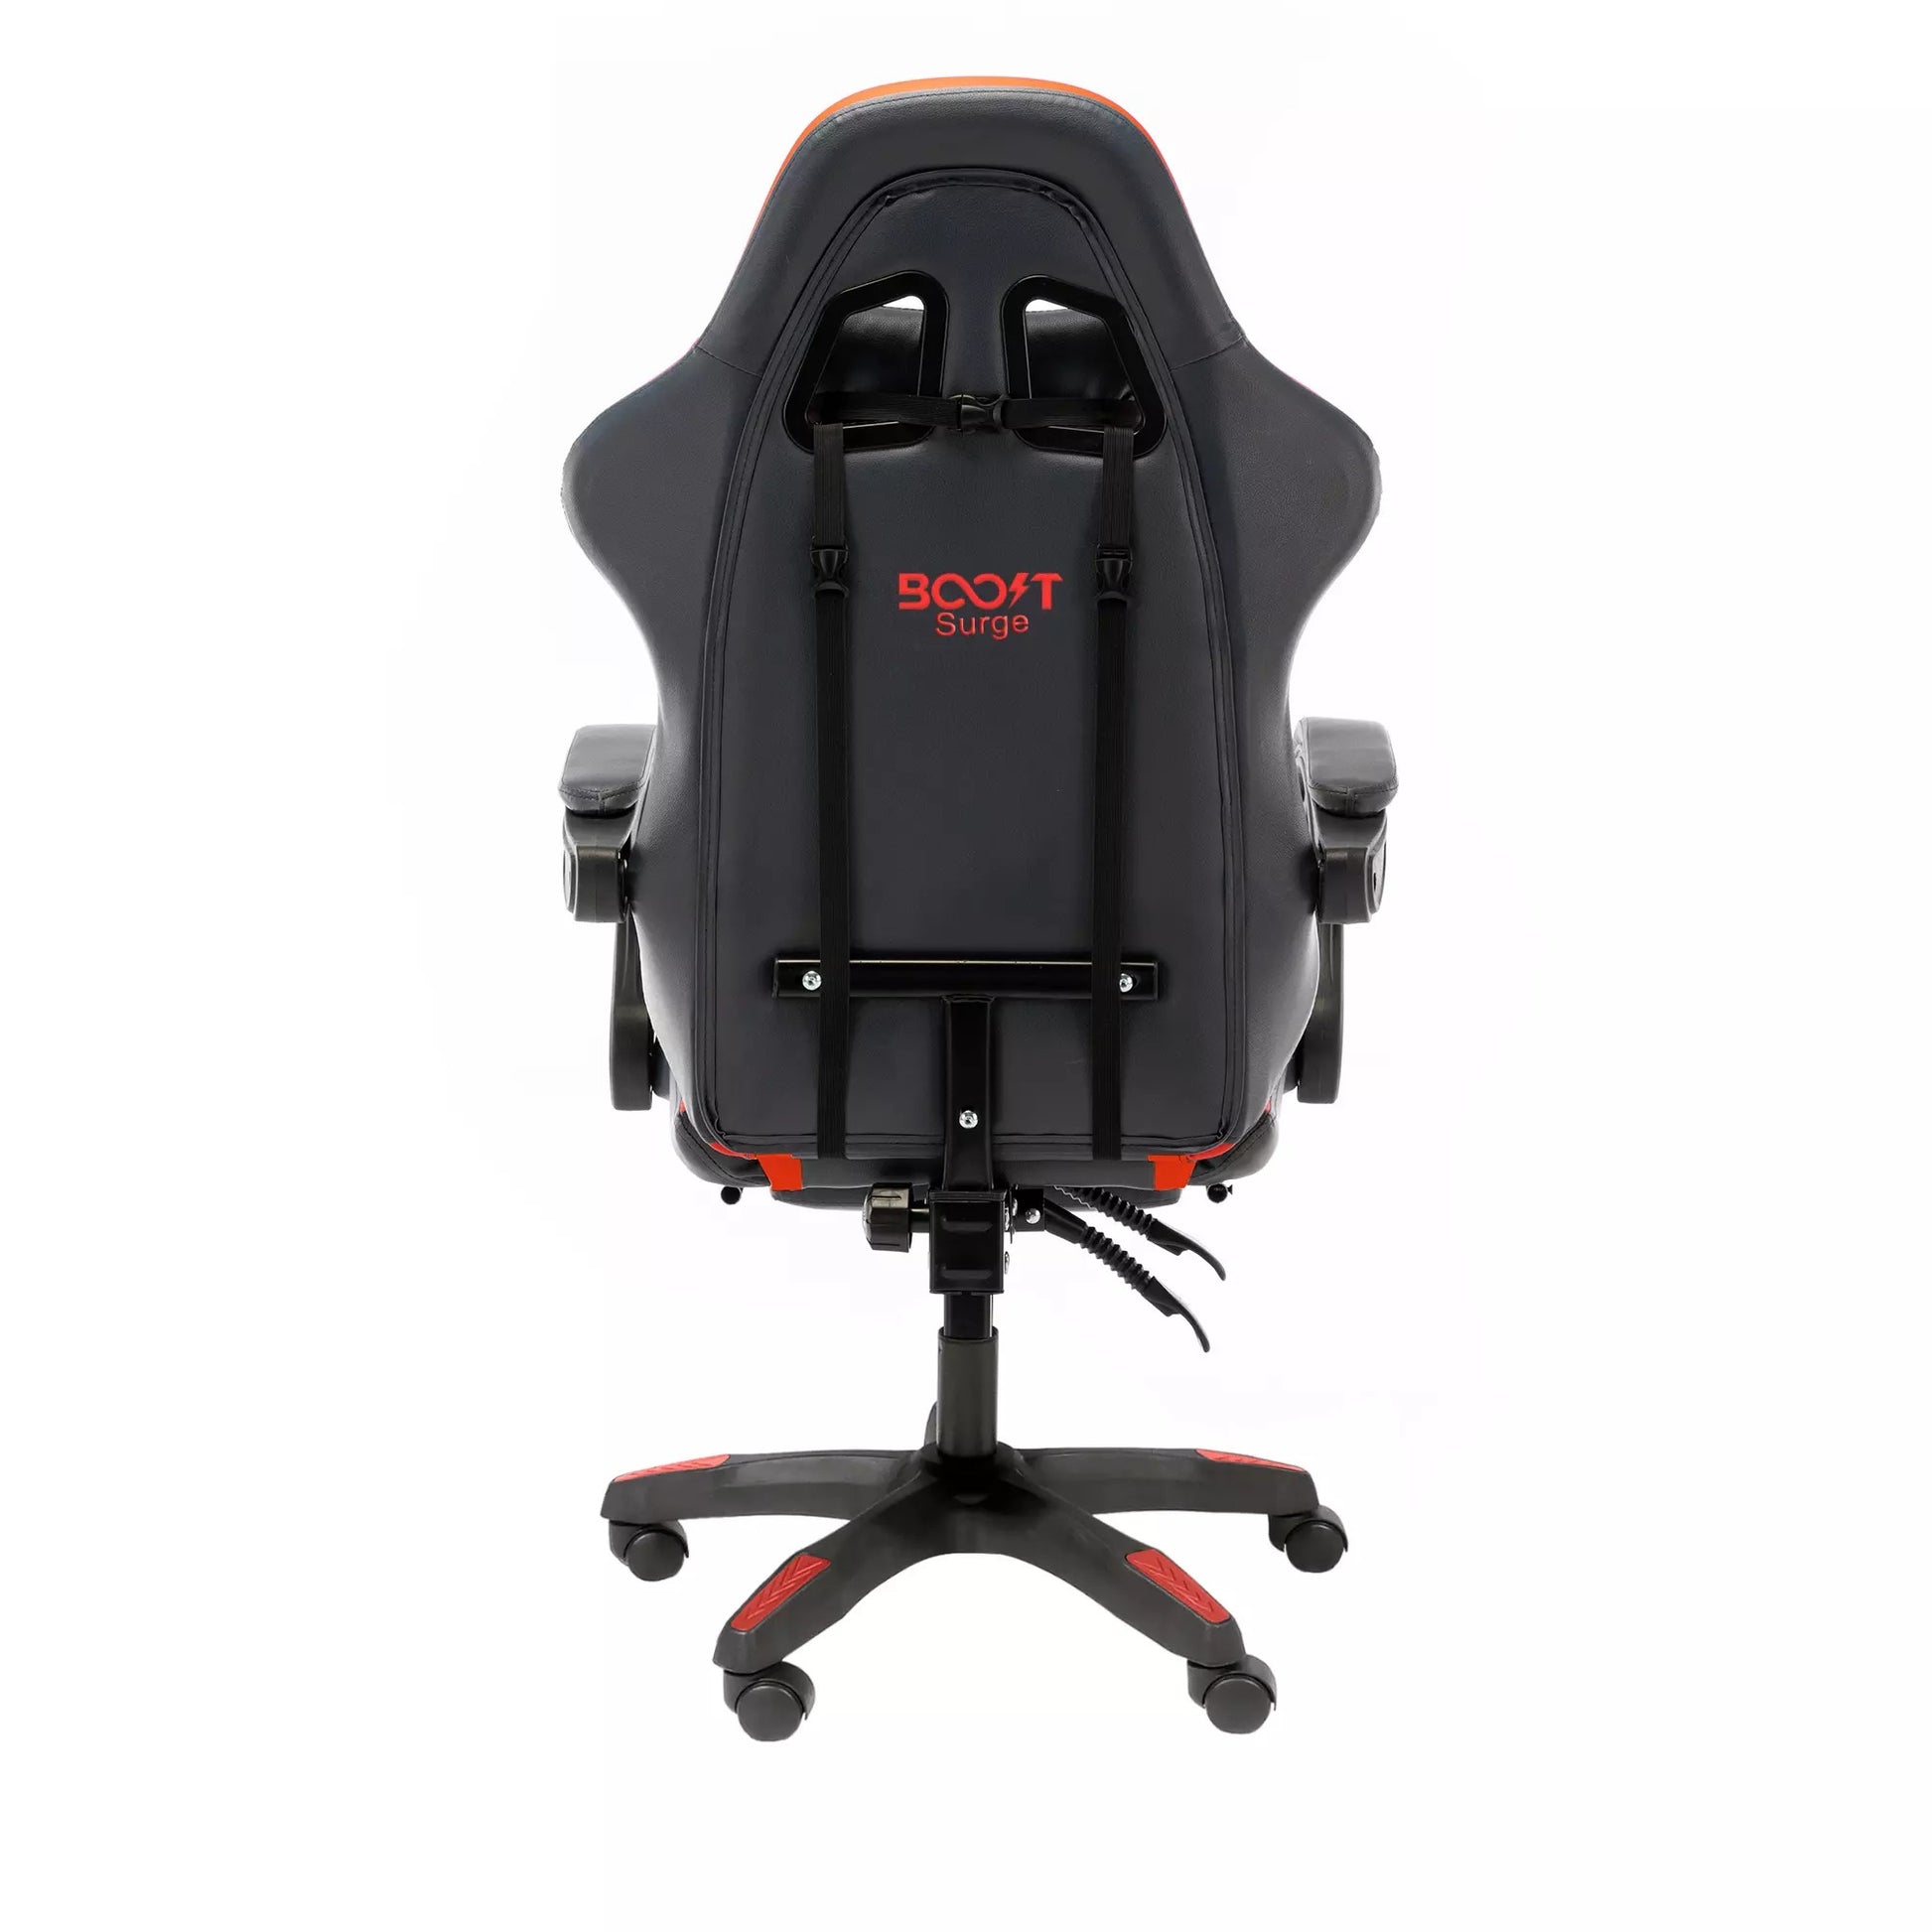 Boost Surge Best Quality Gaming Chair Price in Pakistan